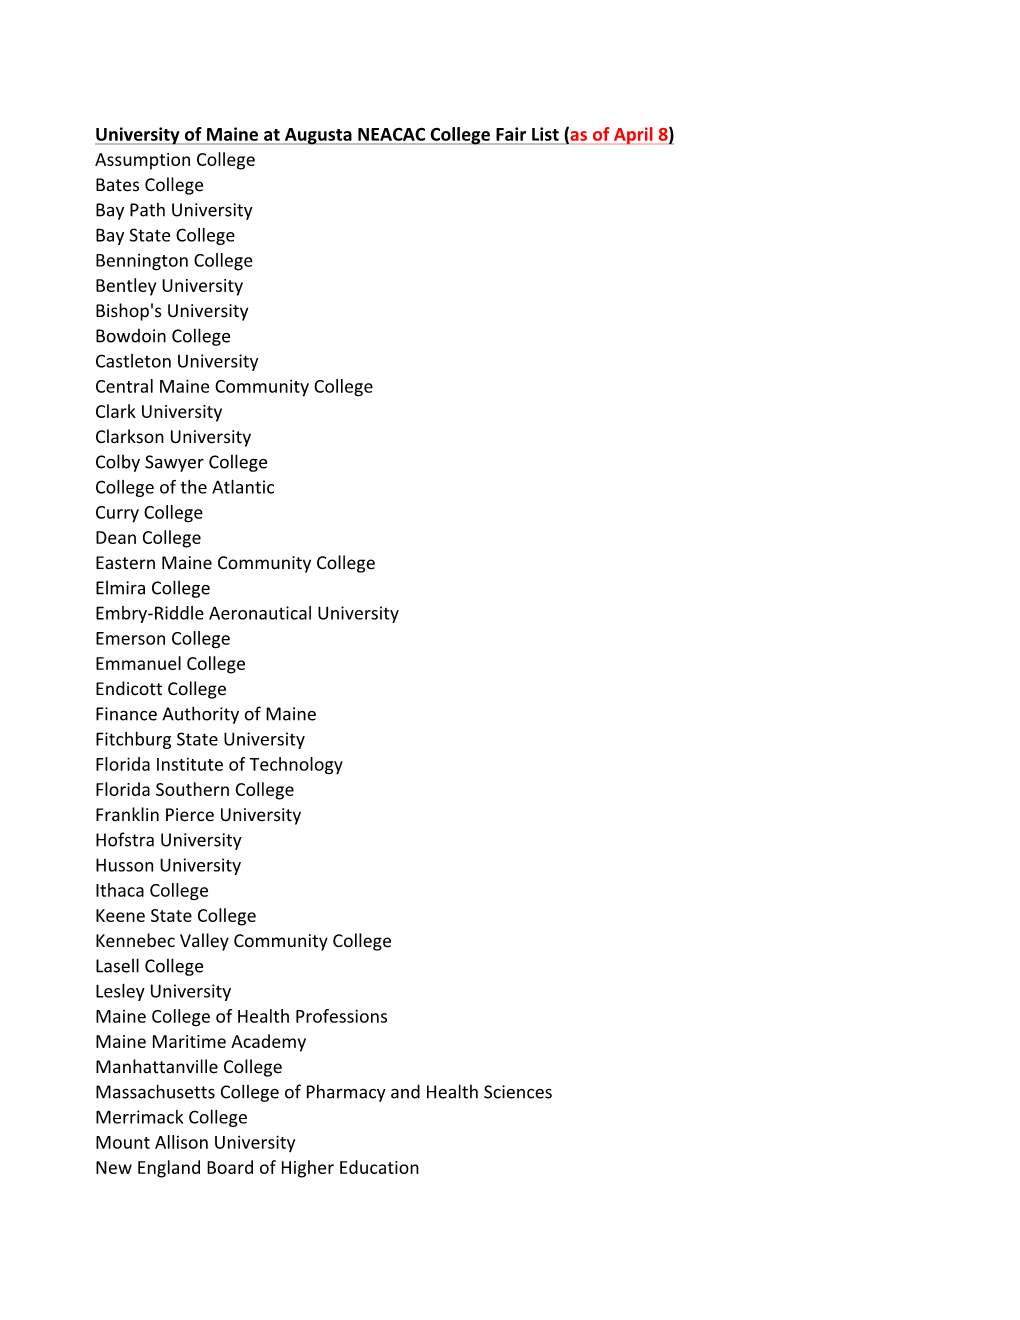 University of Maine at Augusta NEACAC College Fair List (As Of